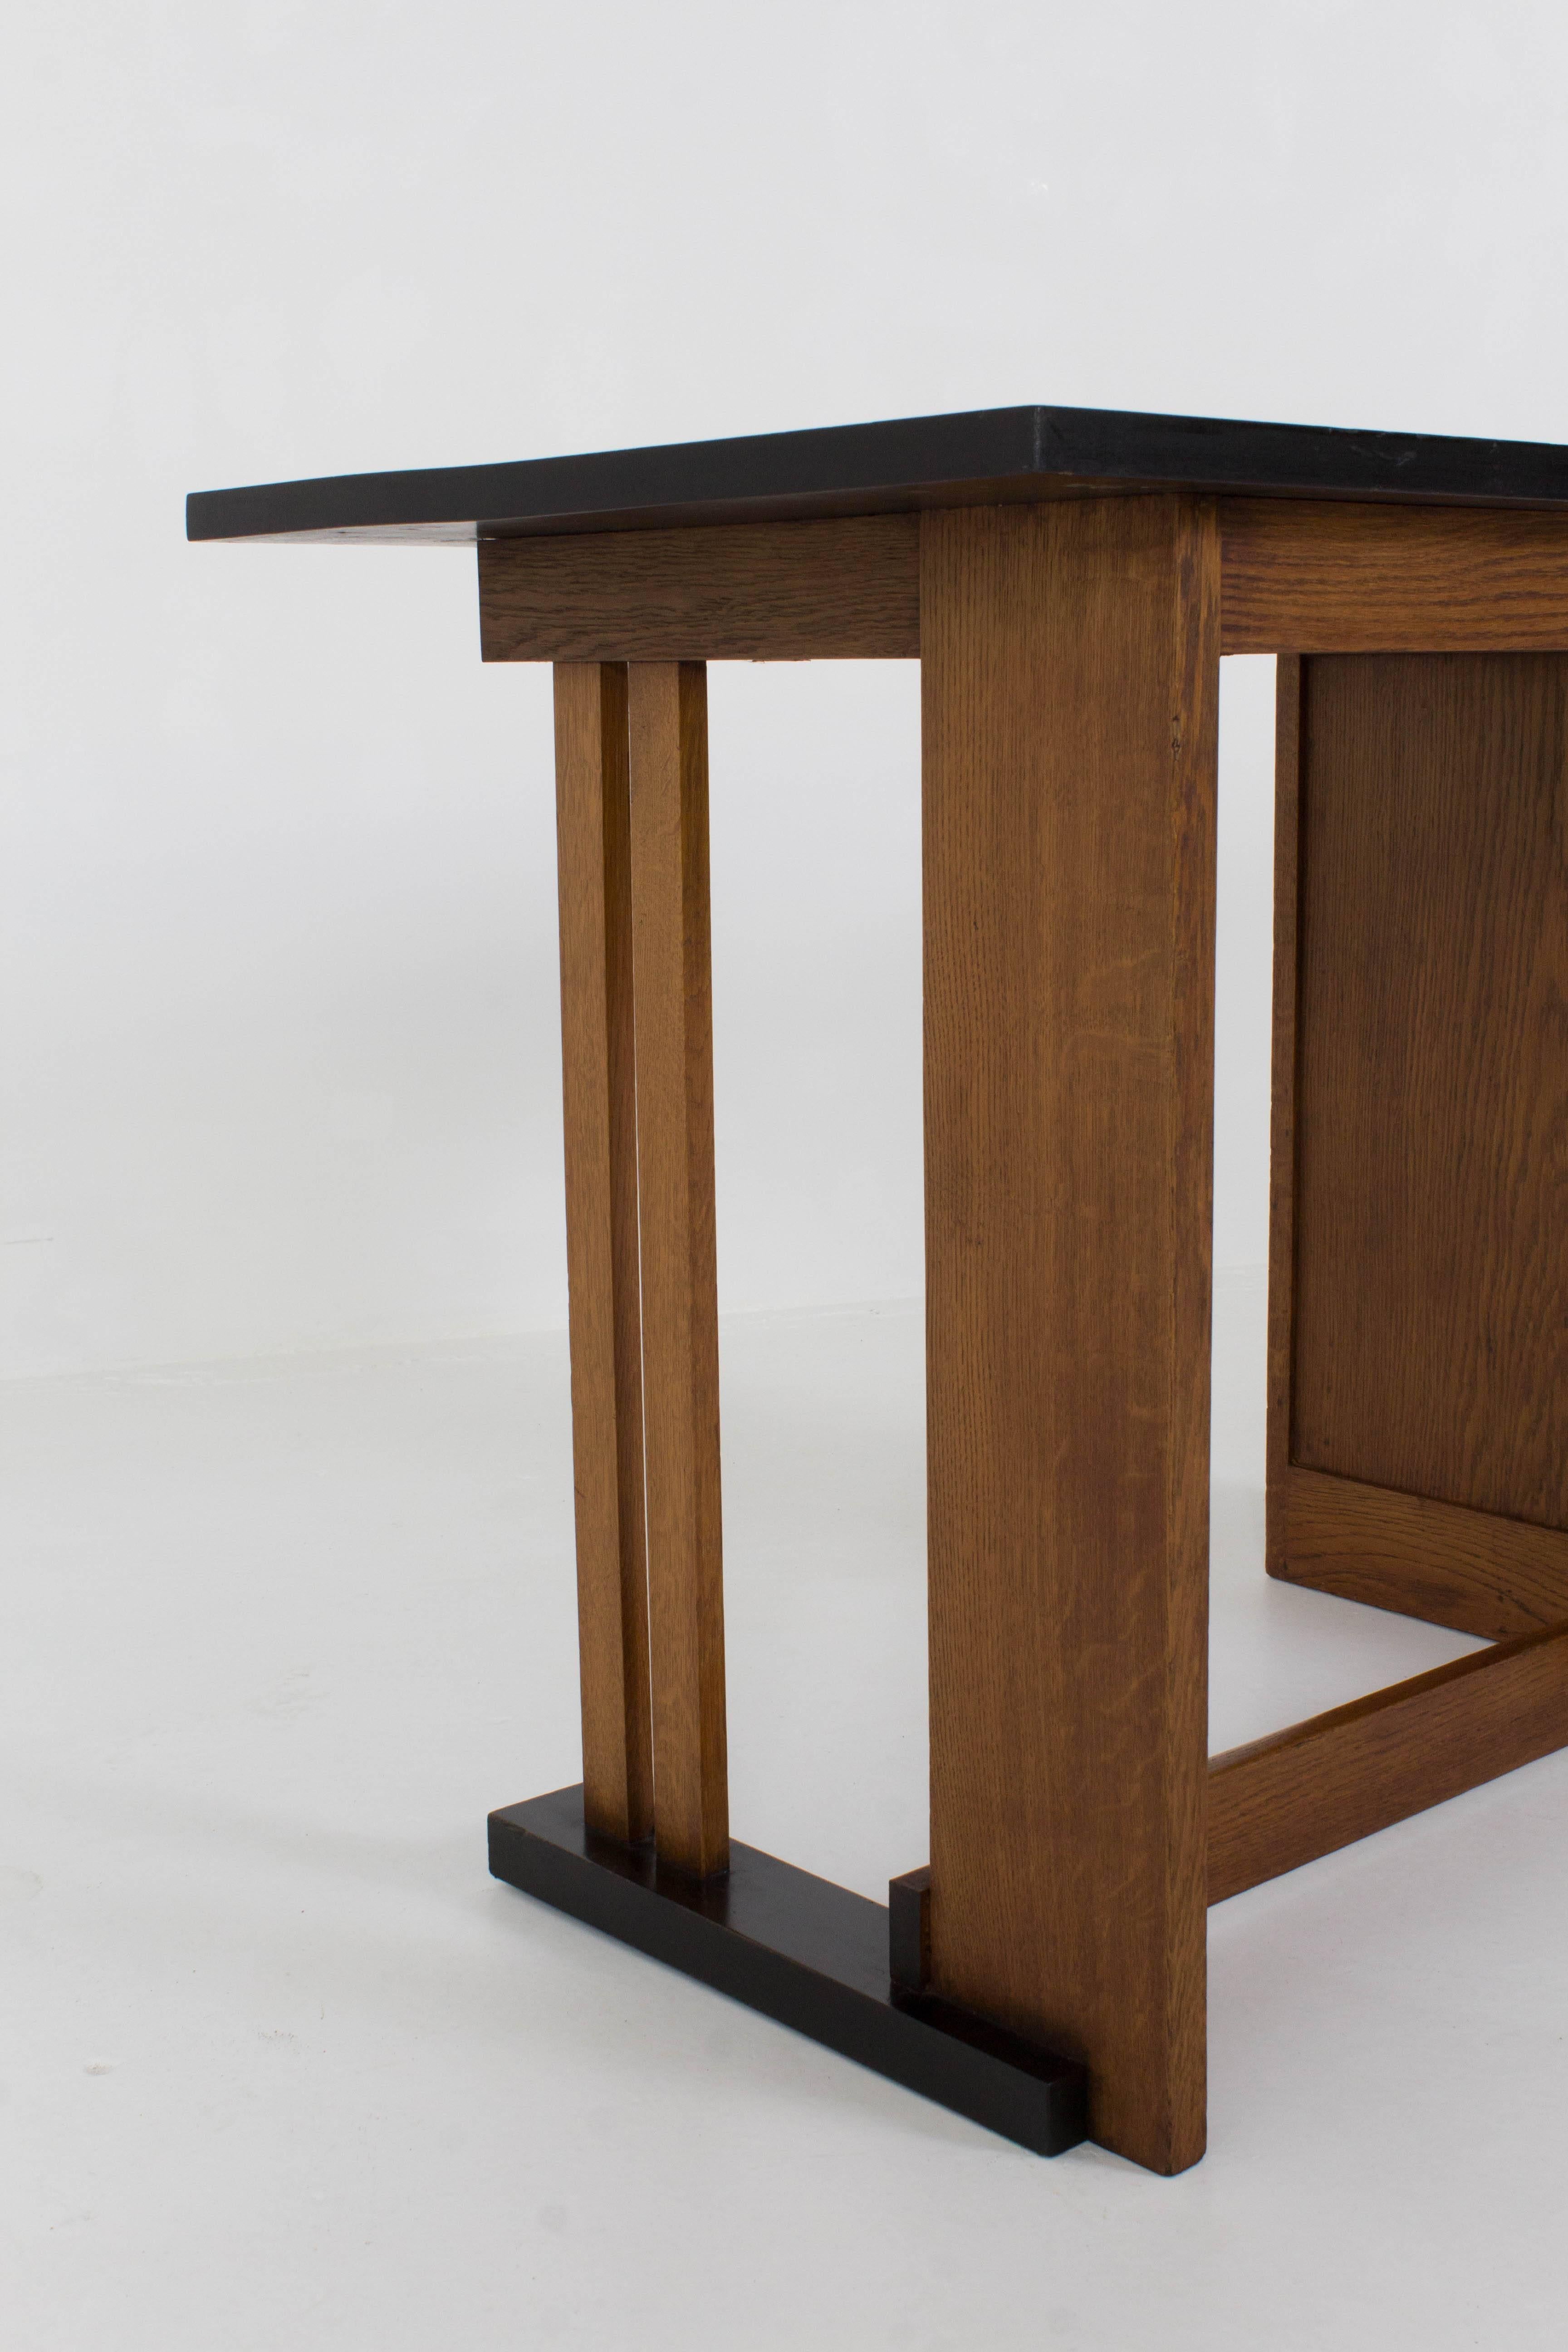 Beech Important and Rare Art Deco Haagse School Desk by Cor Alons for L.O.V.